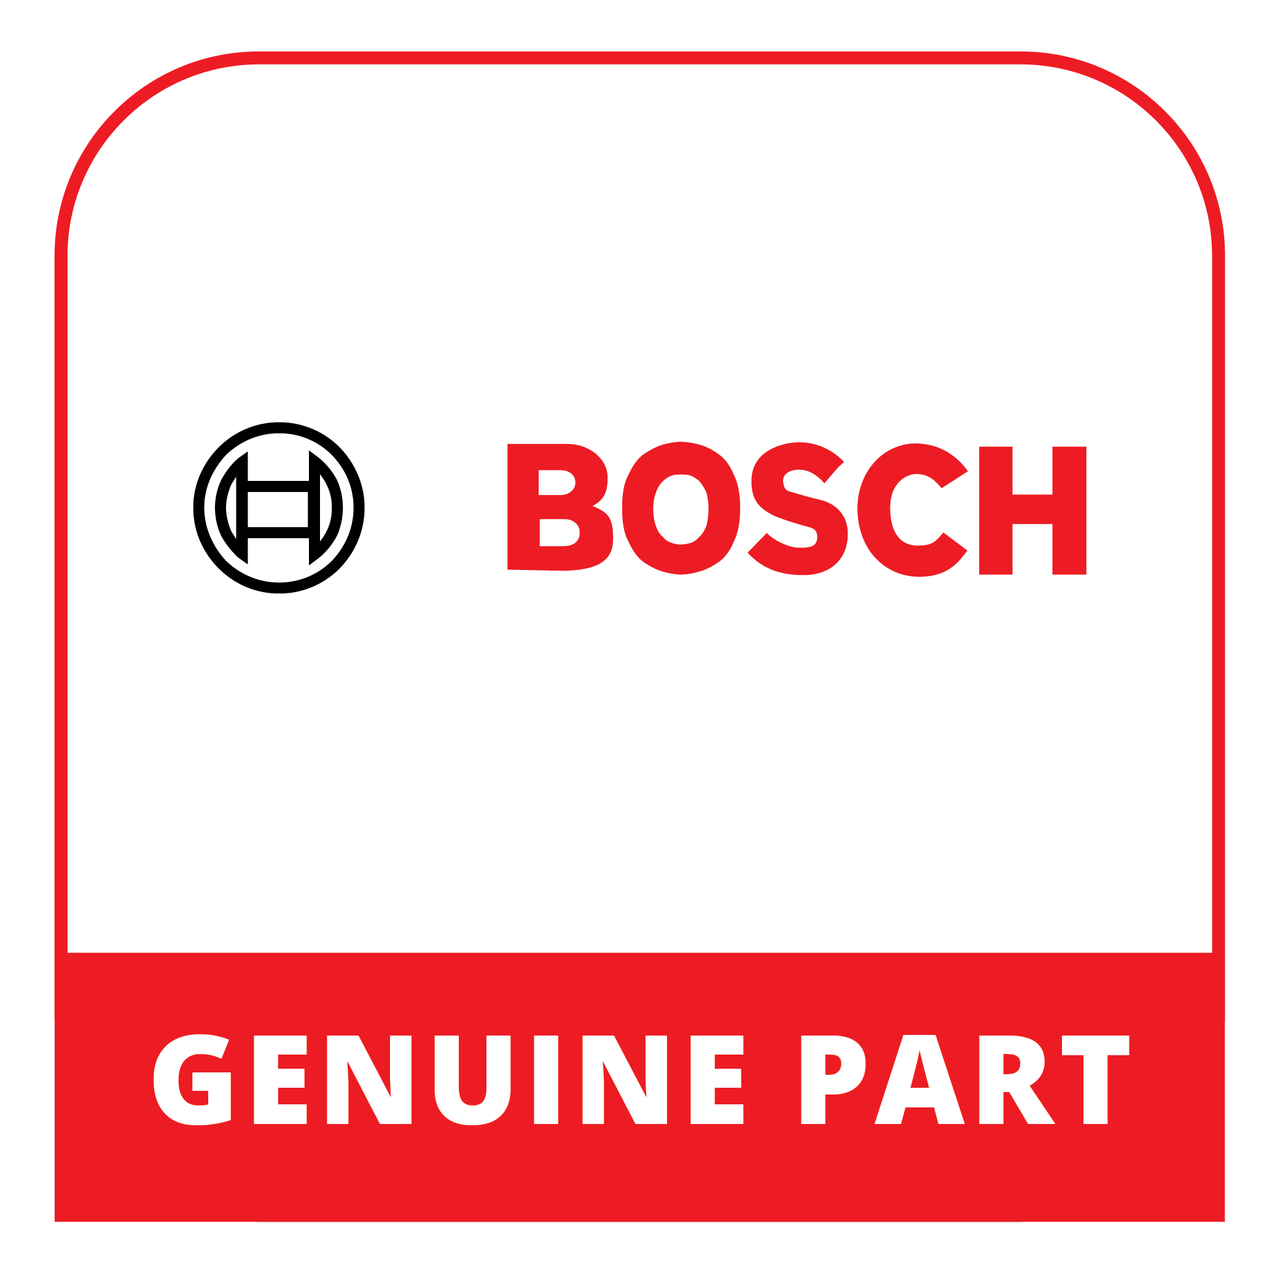 Bosch (Thermador) 20003088 - Cover Sheet - Genuine Bosch (Thermador) Part